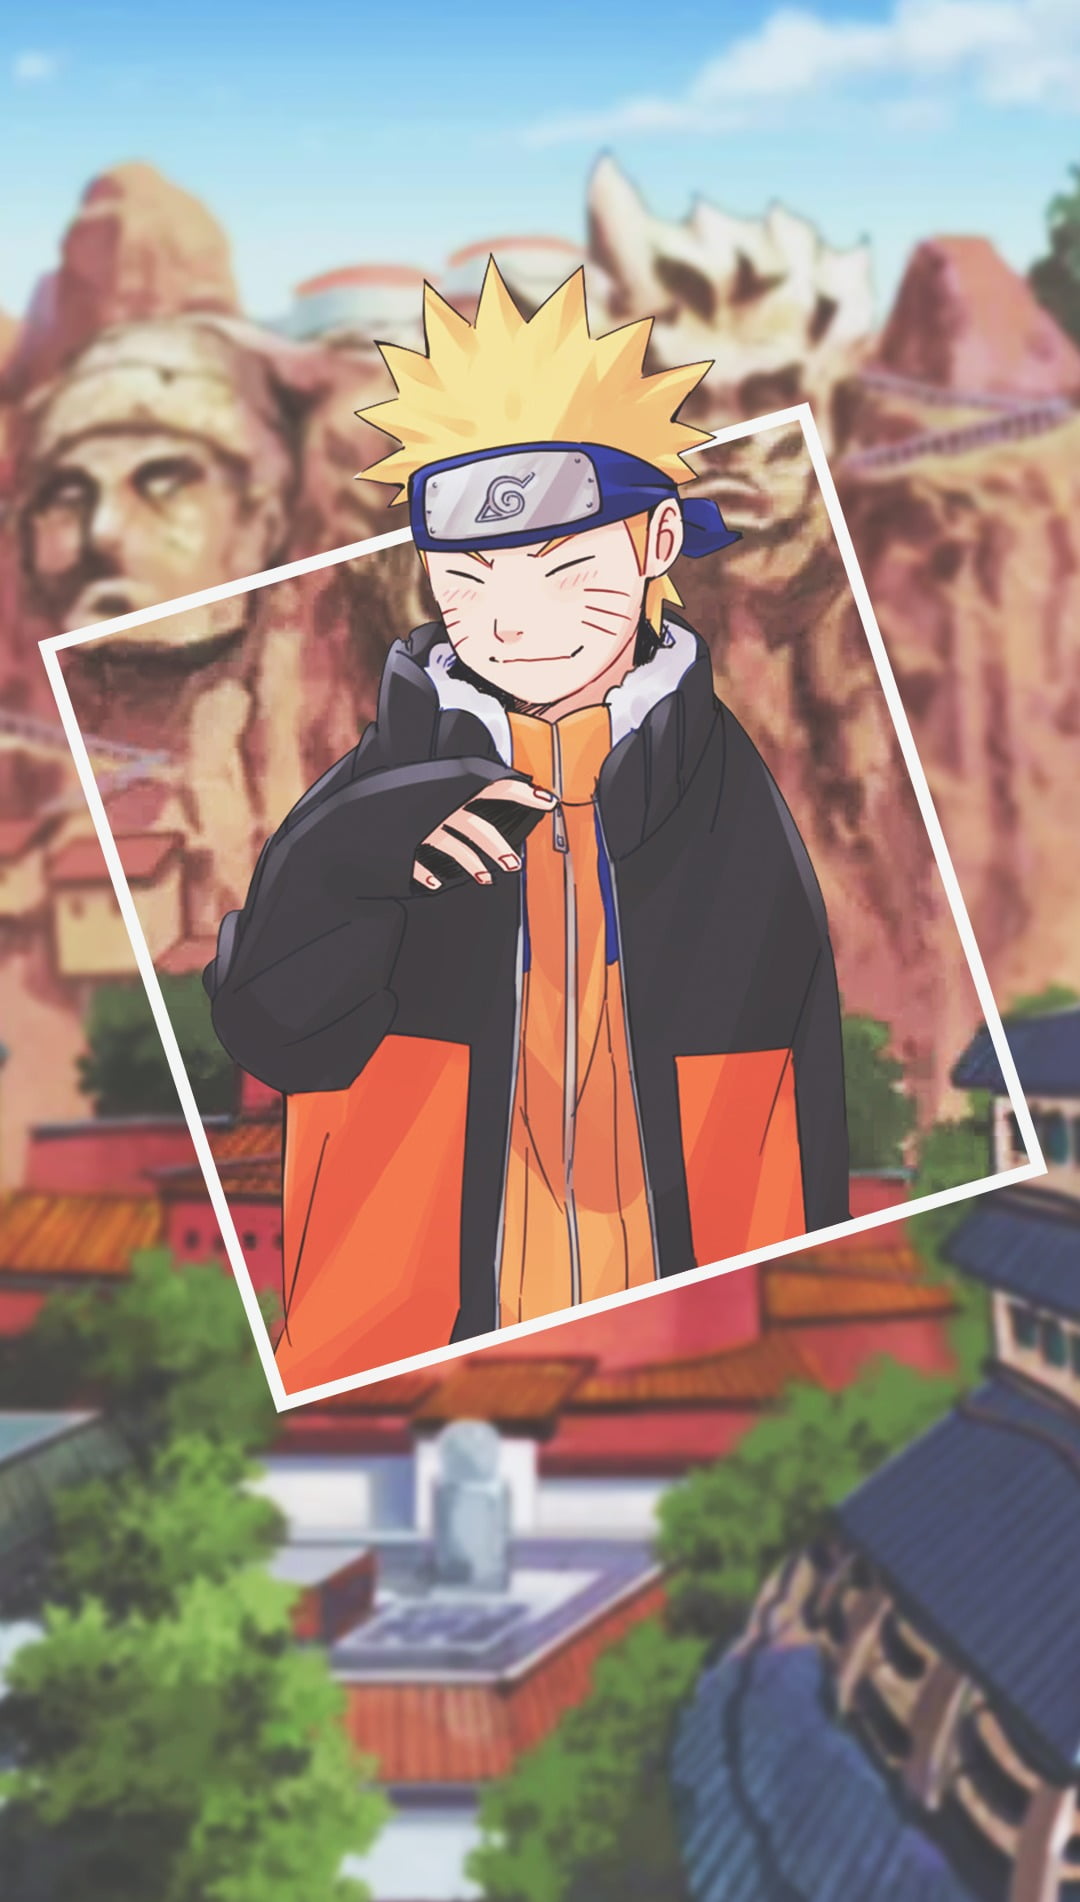 anime boys, picture-in-picture, Naruto (anime), day, real people